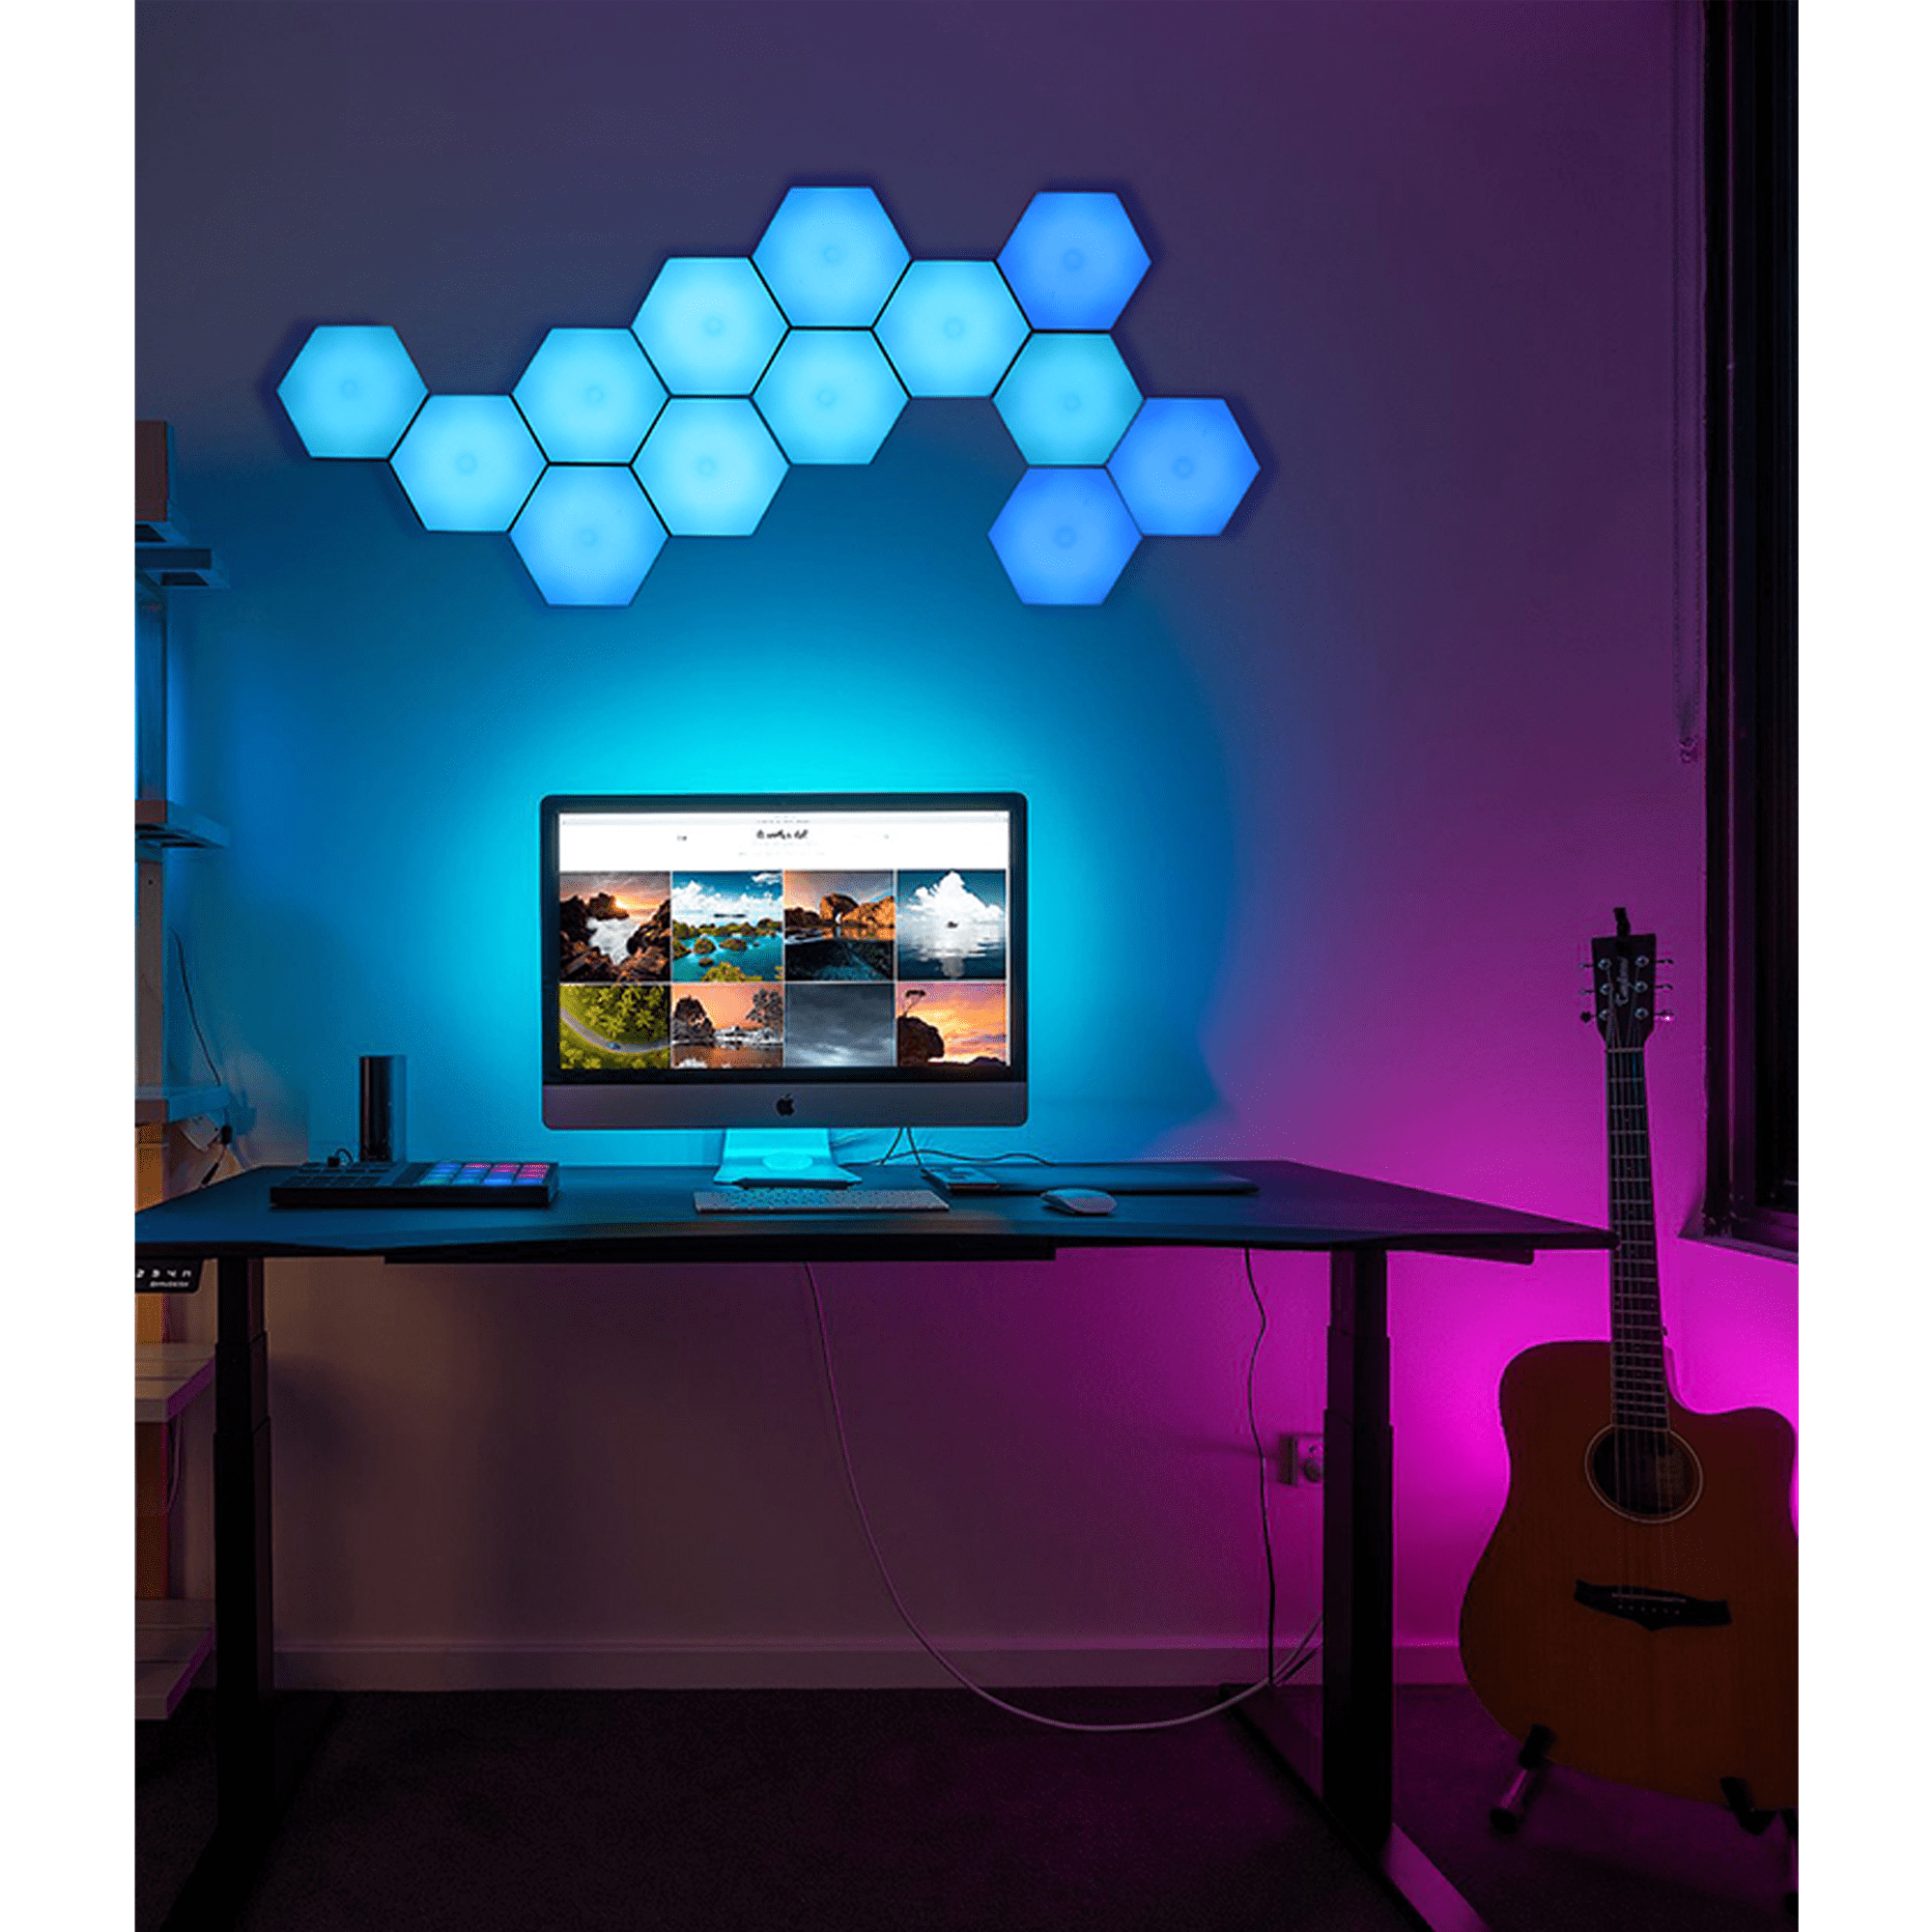 Hexagon with Remote, Smart DIY Hexagon Wall Lights, Dual Control Hexagonal LED Light Wall Panels with USB-Power, Geometry Hex Lights Touch Used in Game Room Decor, Party - Walmart.com